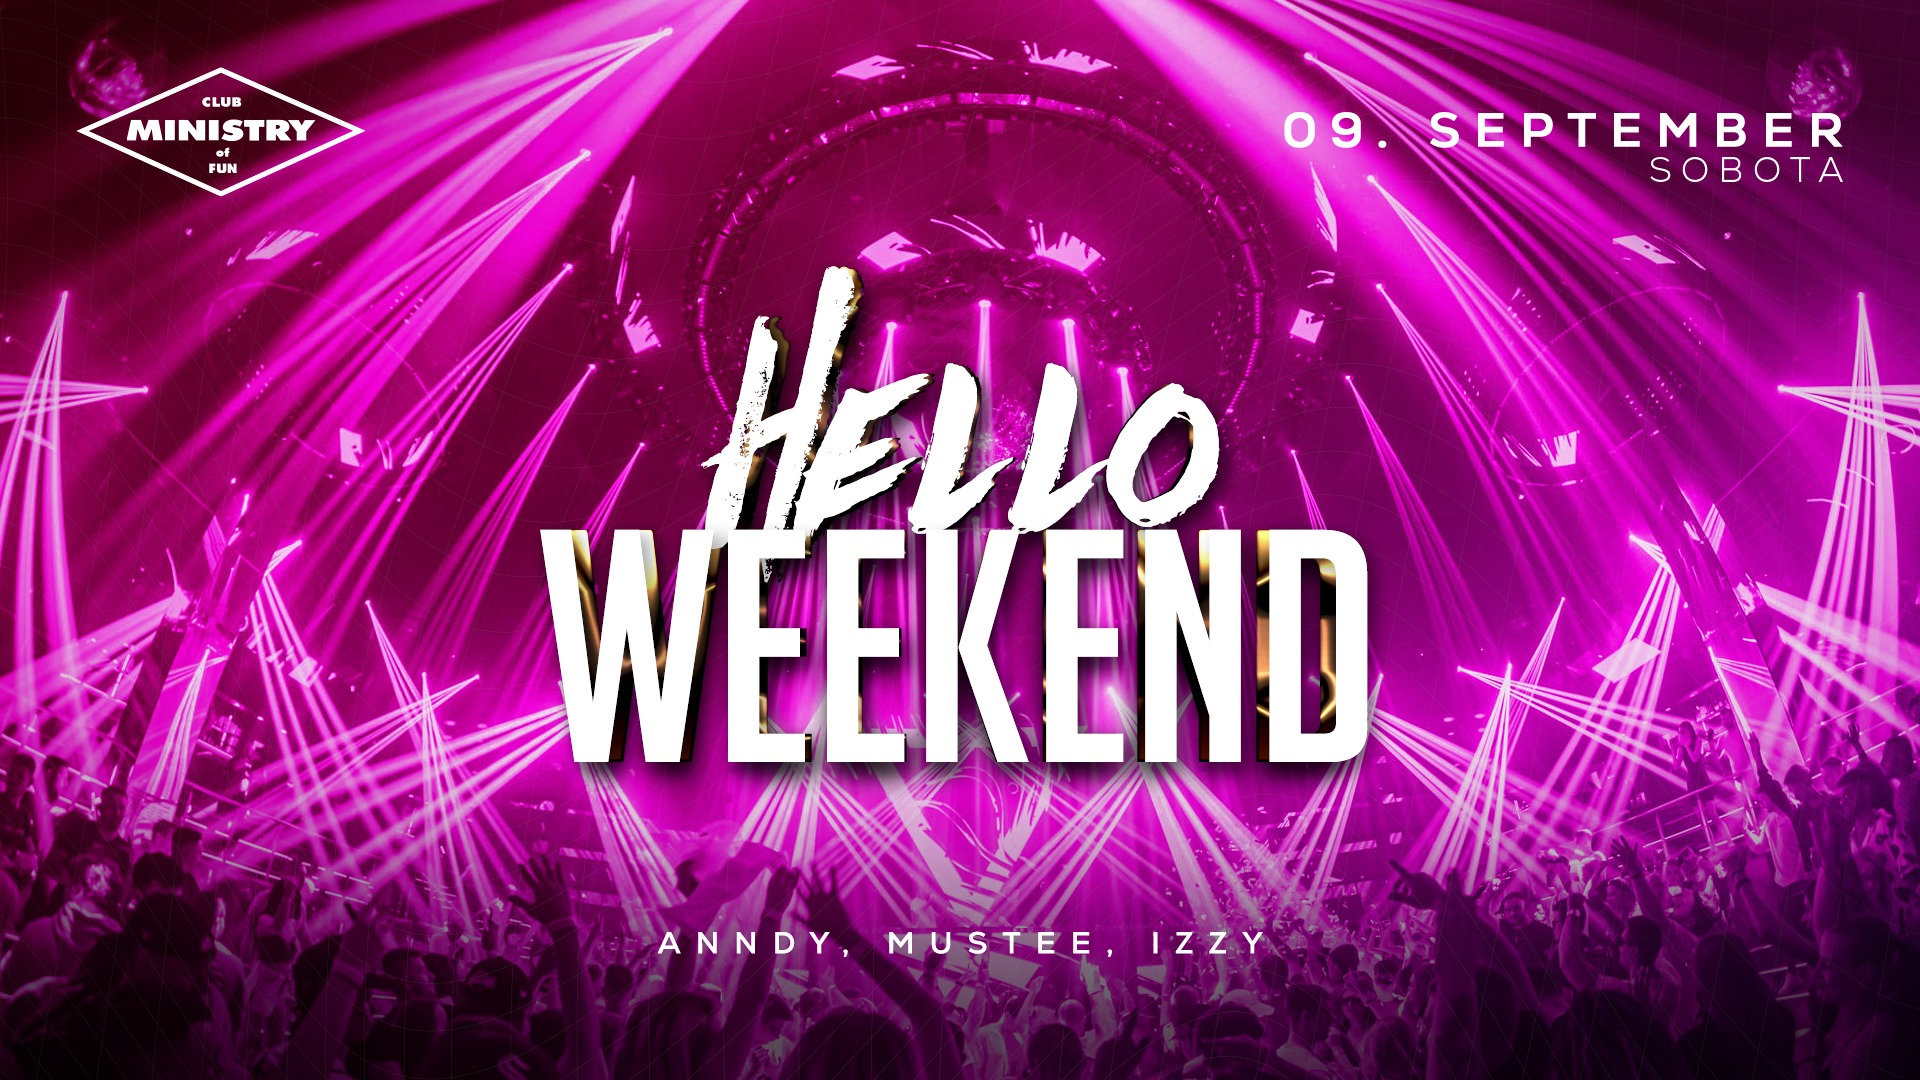 HELLO WEEKEND | Ministry of Fun